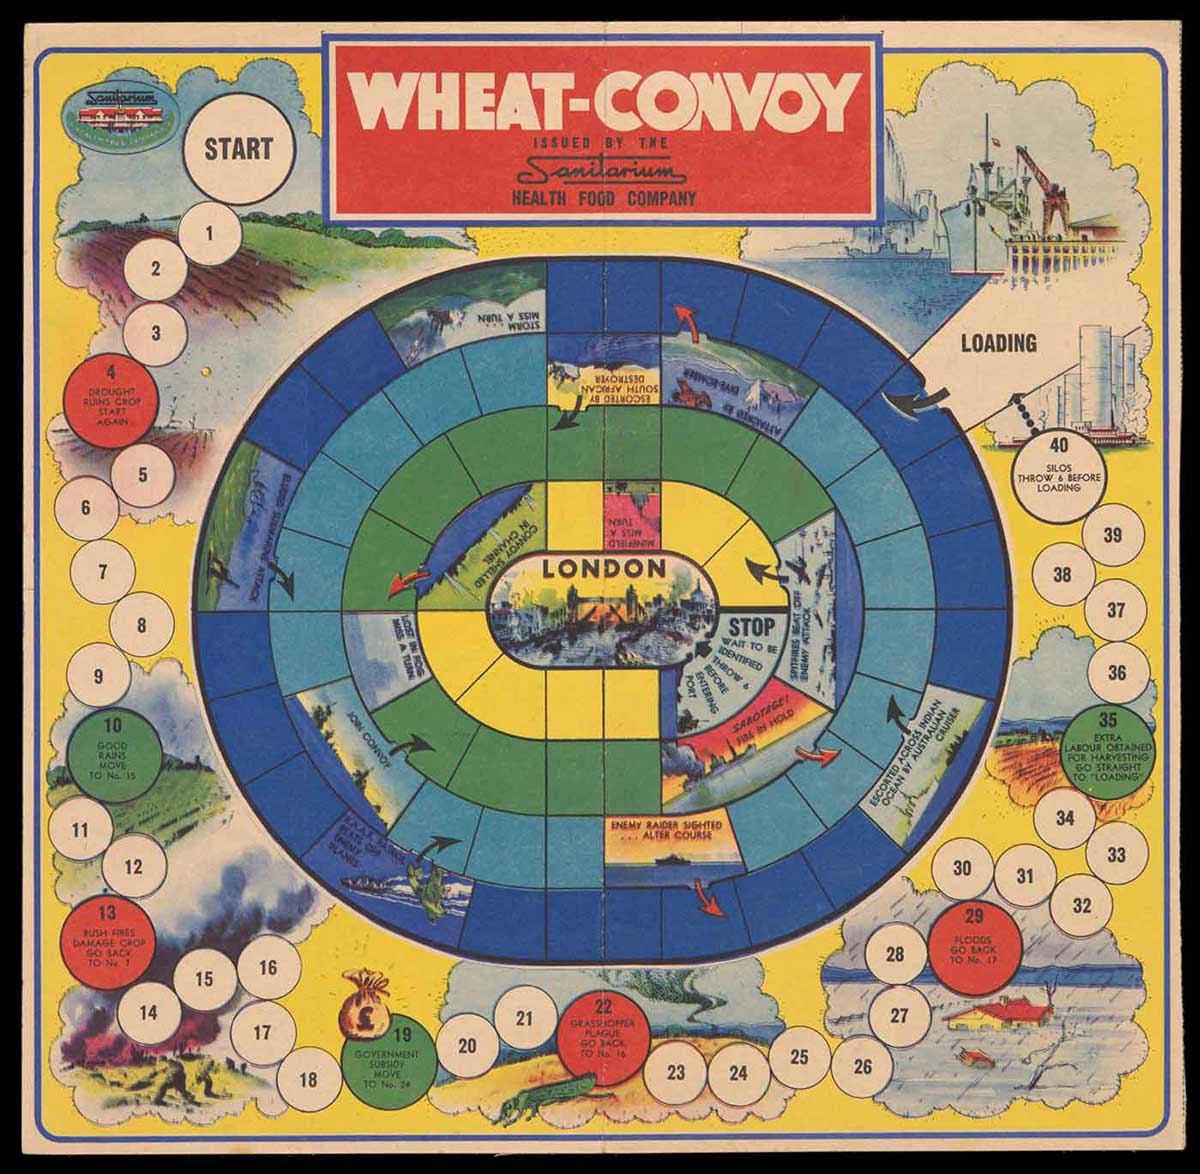 Board game with London at the centre and game squares spiralling around the stages of wheat production and export from Australia. - click to view larger image